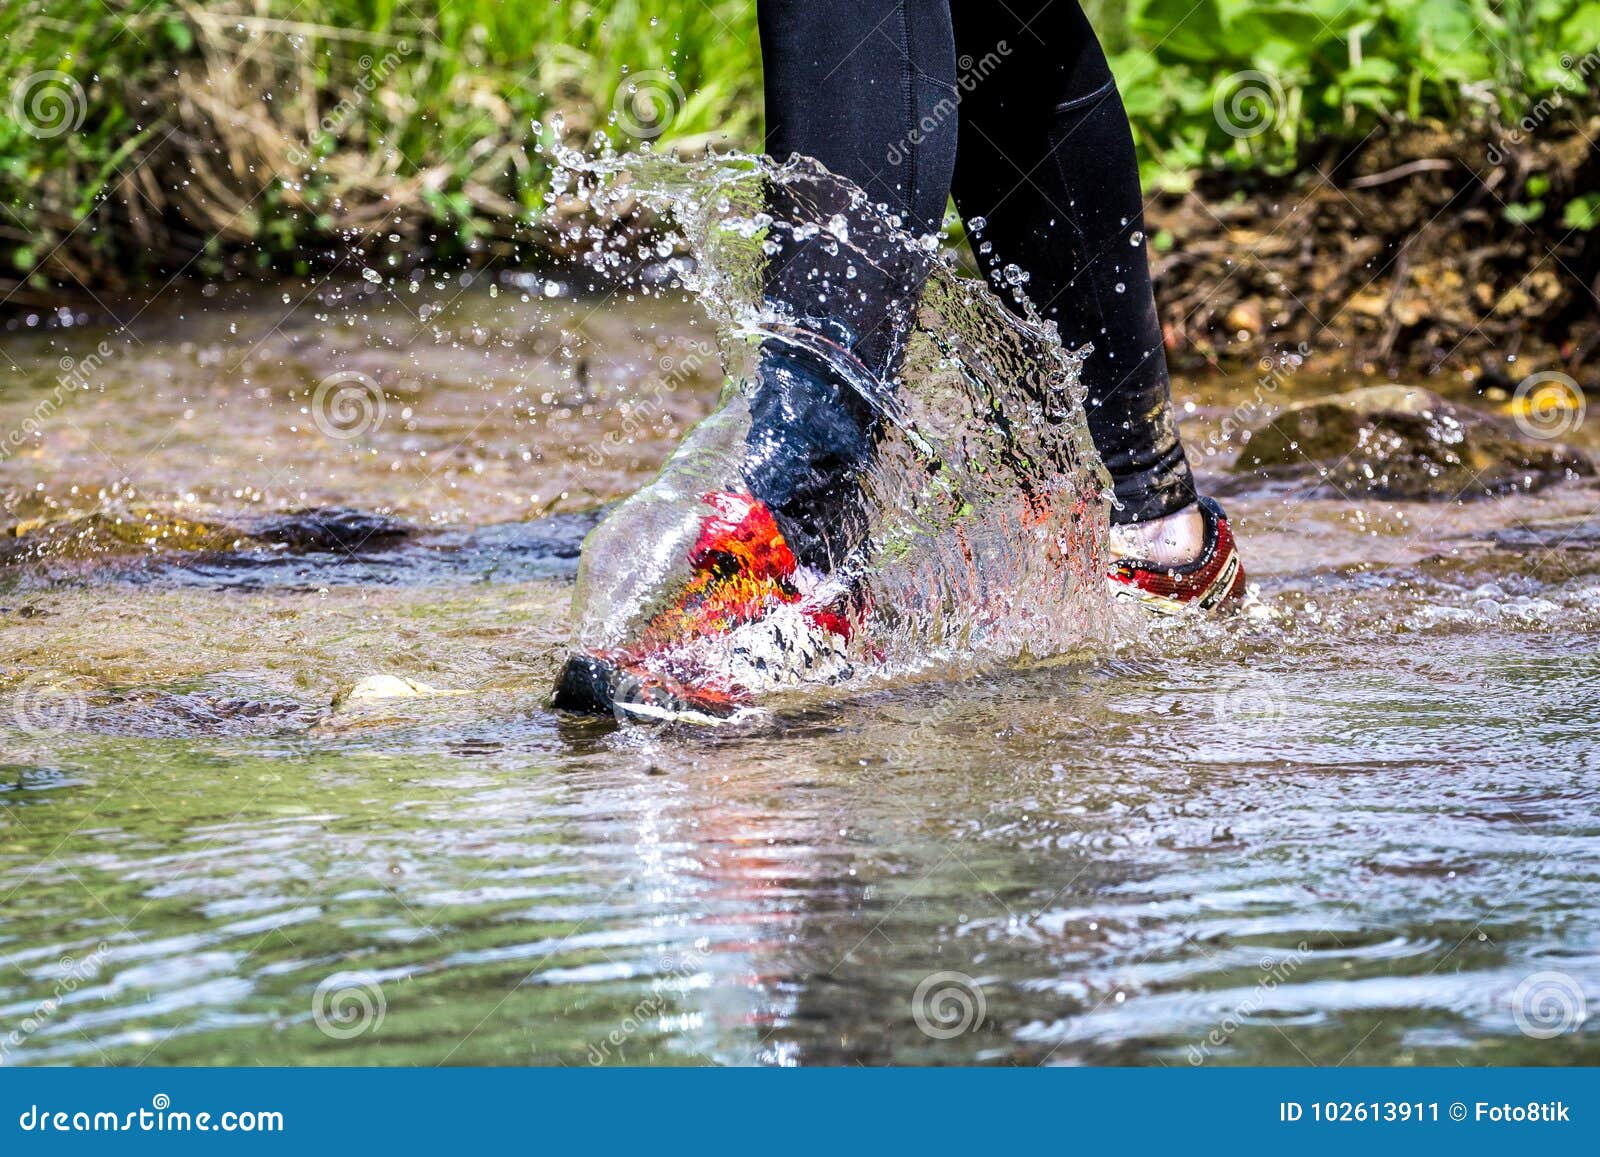 man trail running in the mountains, crossing a creek